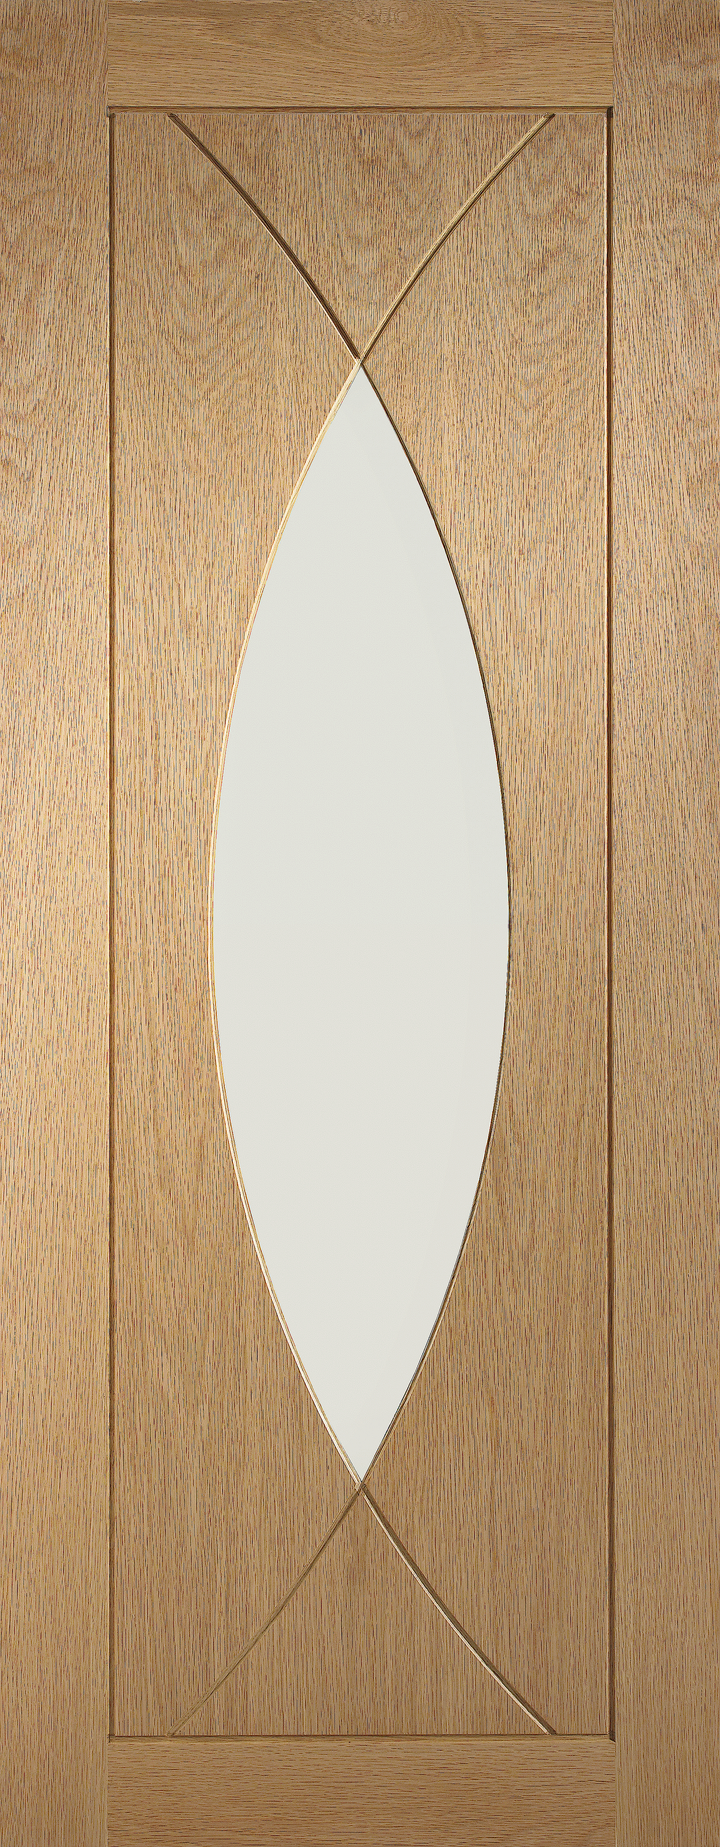 Pesaro with Clear Glass Unfinished Oak Door   